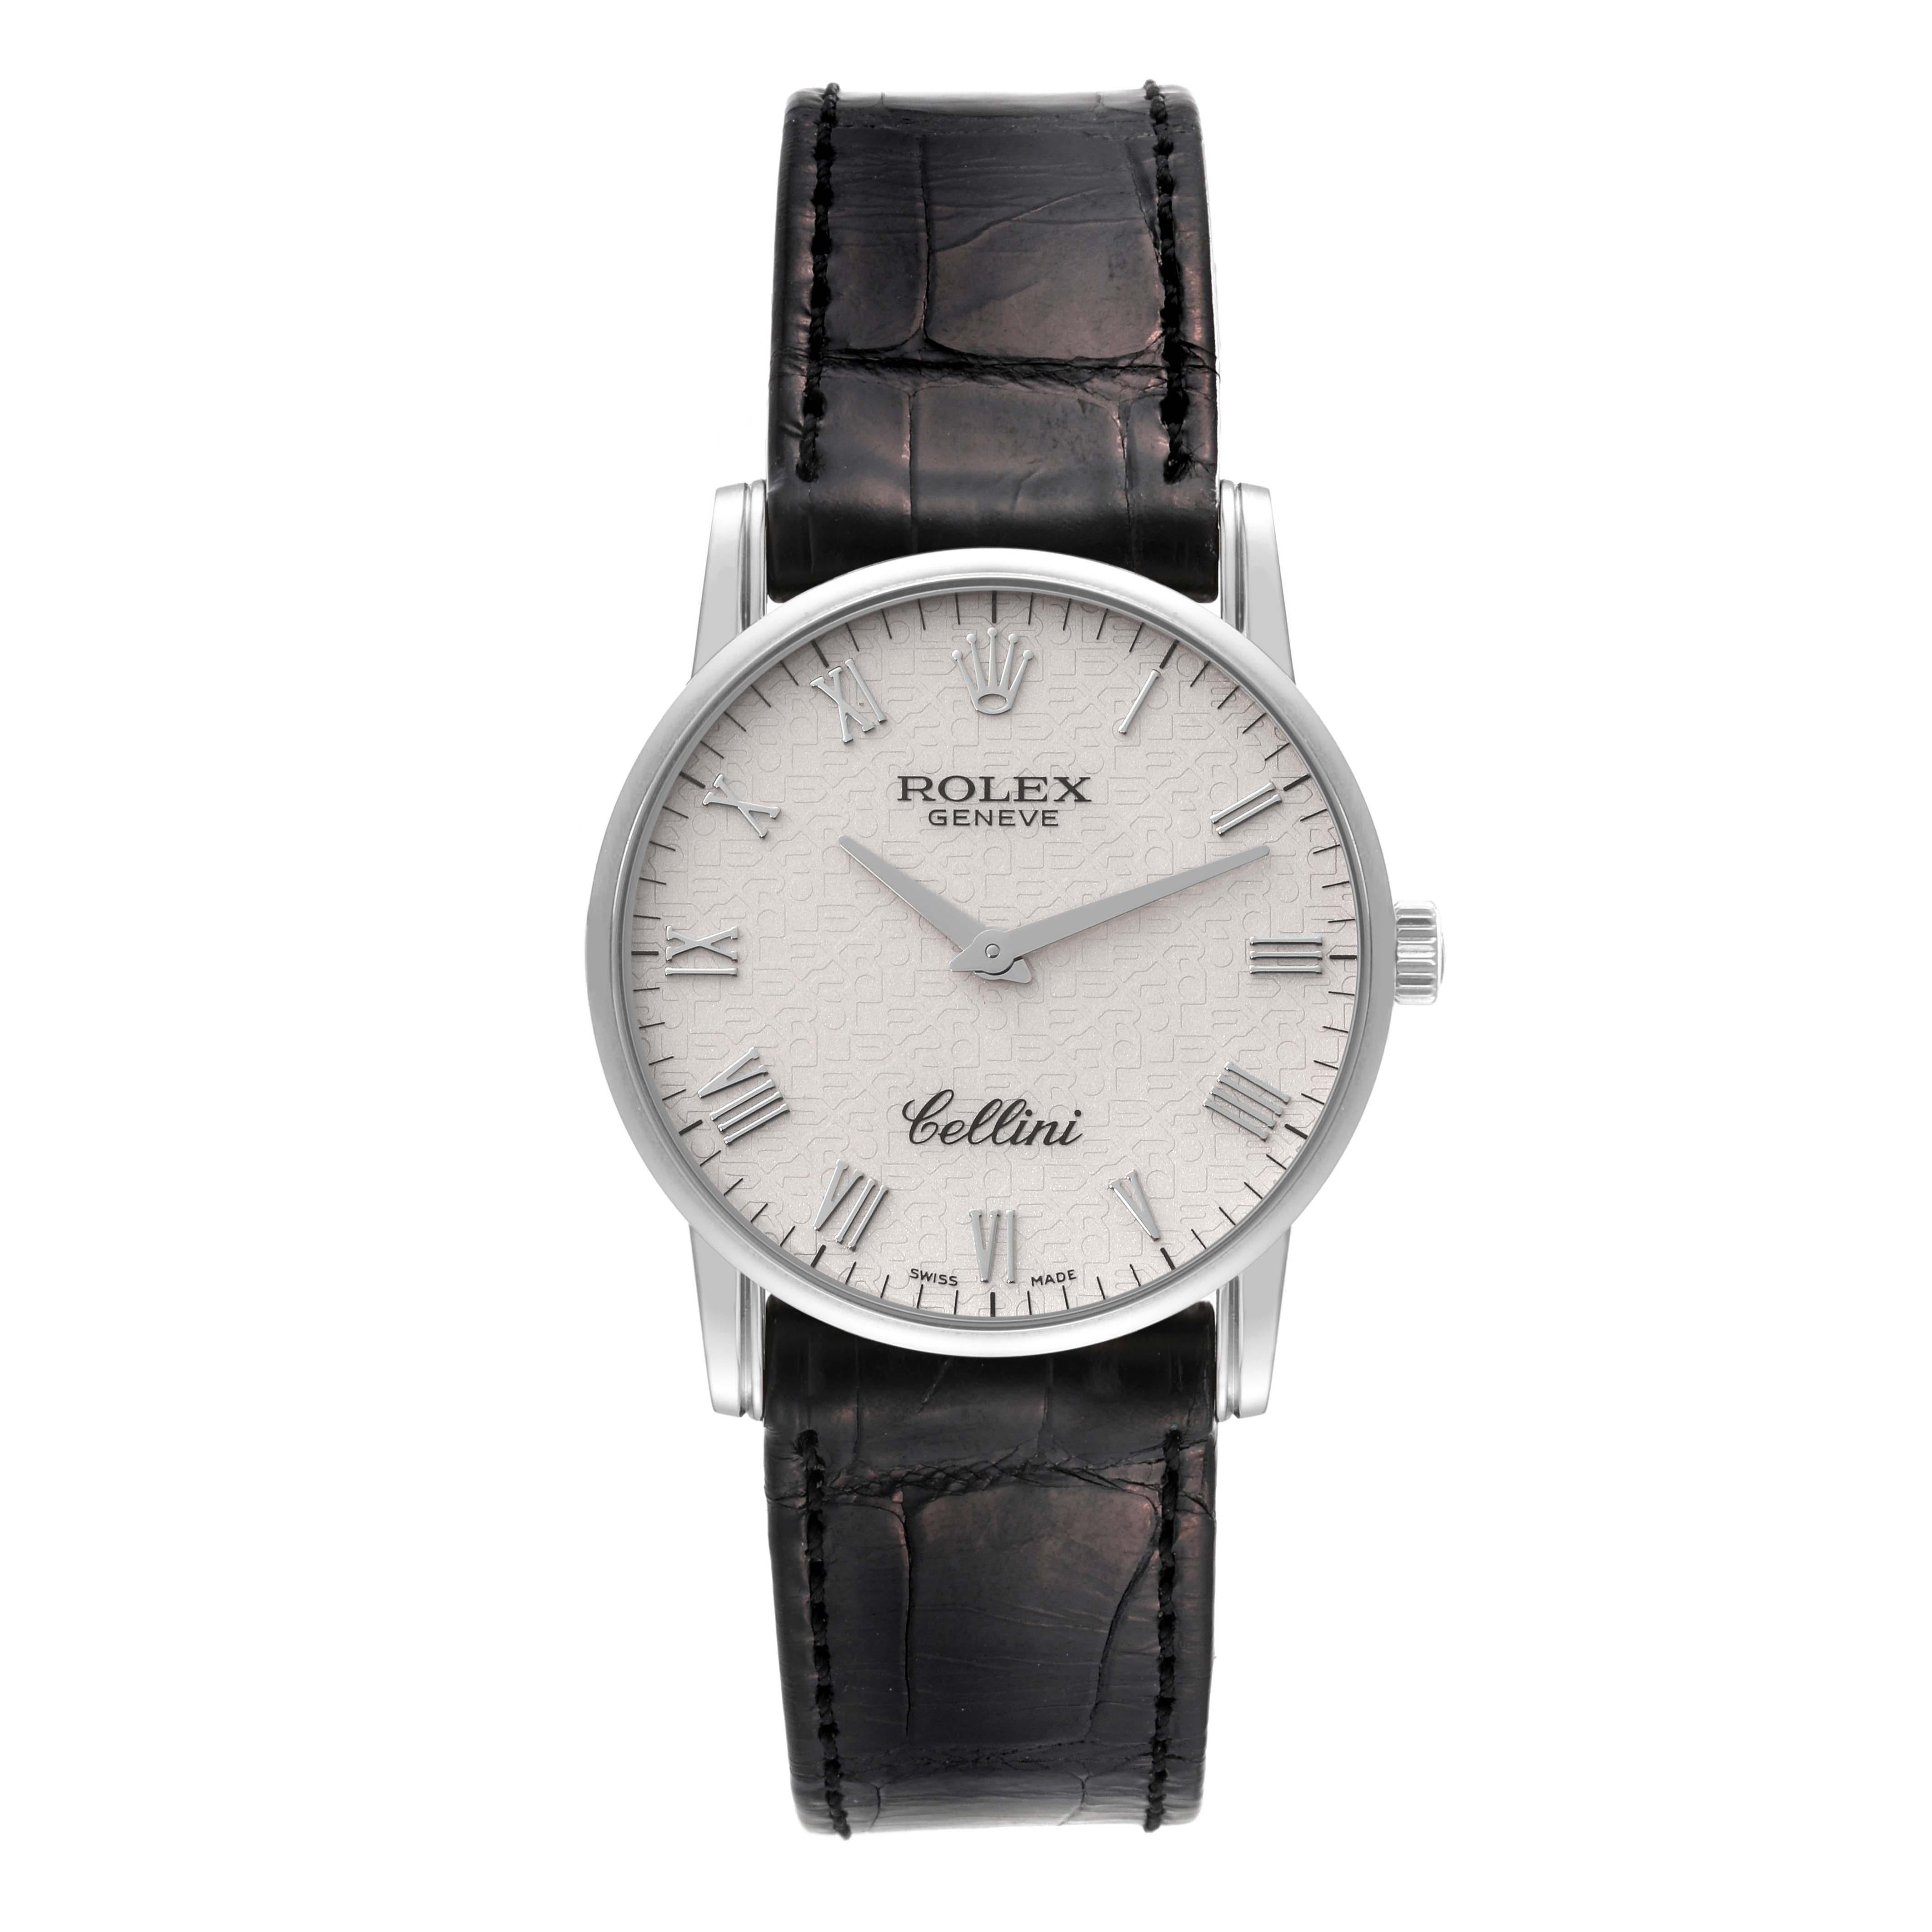 Rolex Cellini Classic White Gold Ivory Anniversary Dial Mens Watch 5116 Card. Manual winding movement. 18k white gold slim case 32mm in diameter. 5.5mm case thickness. Rolex logo on the crown. . Scratch resistant sapphire crystal. Flat profile.